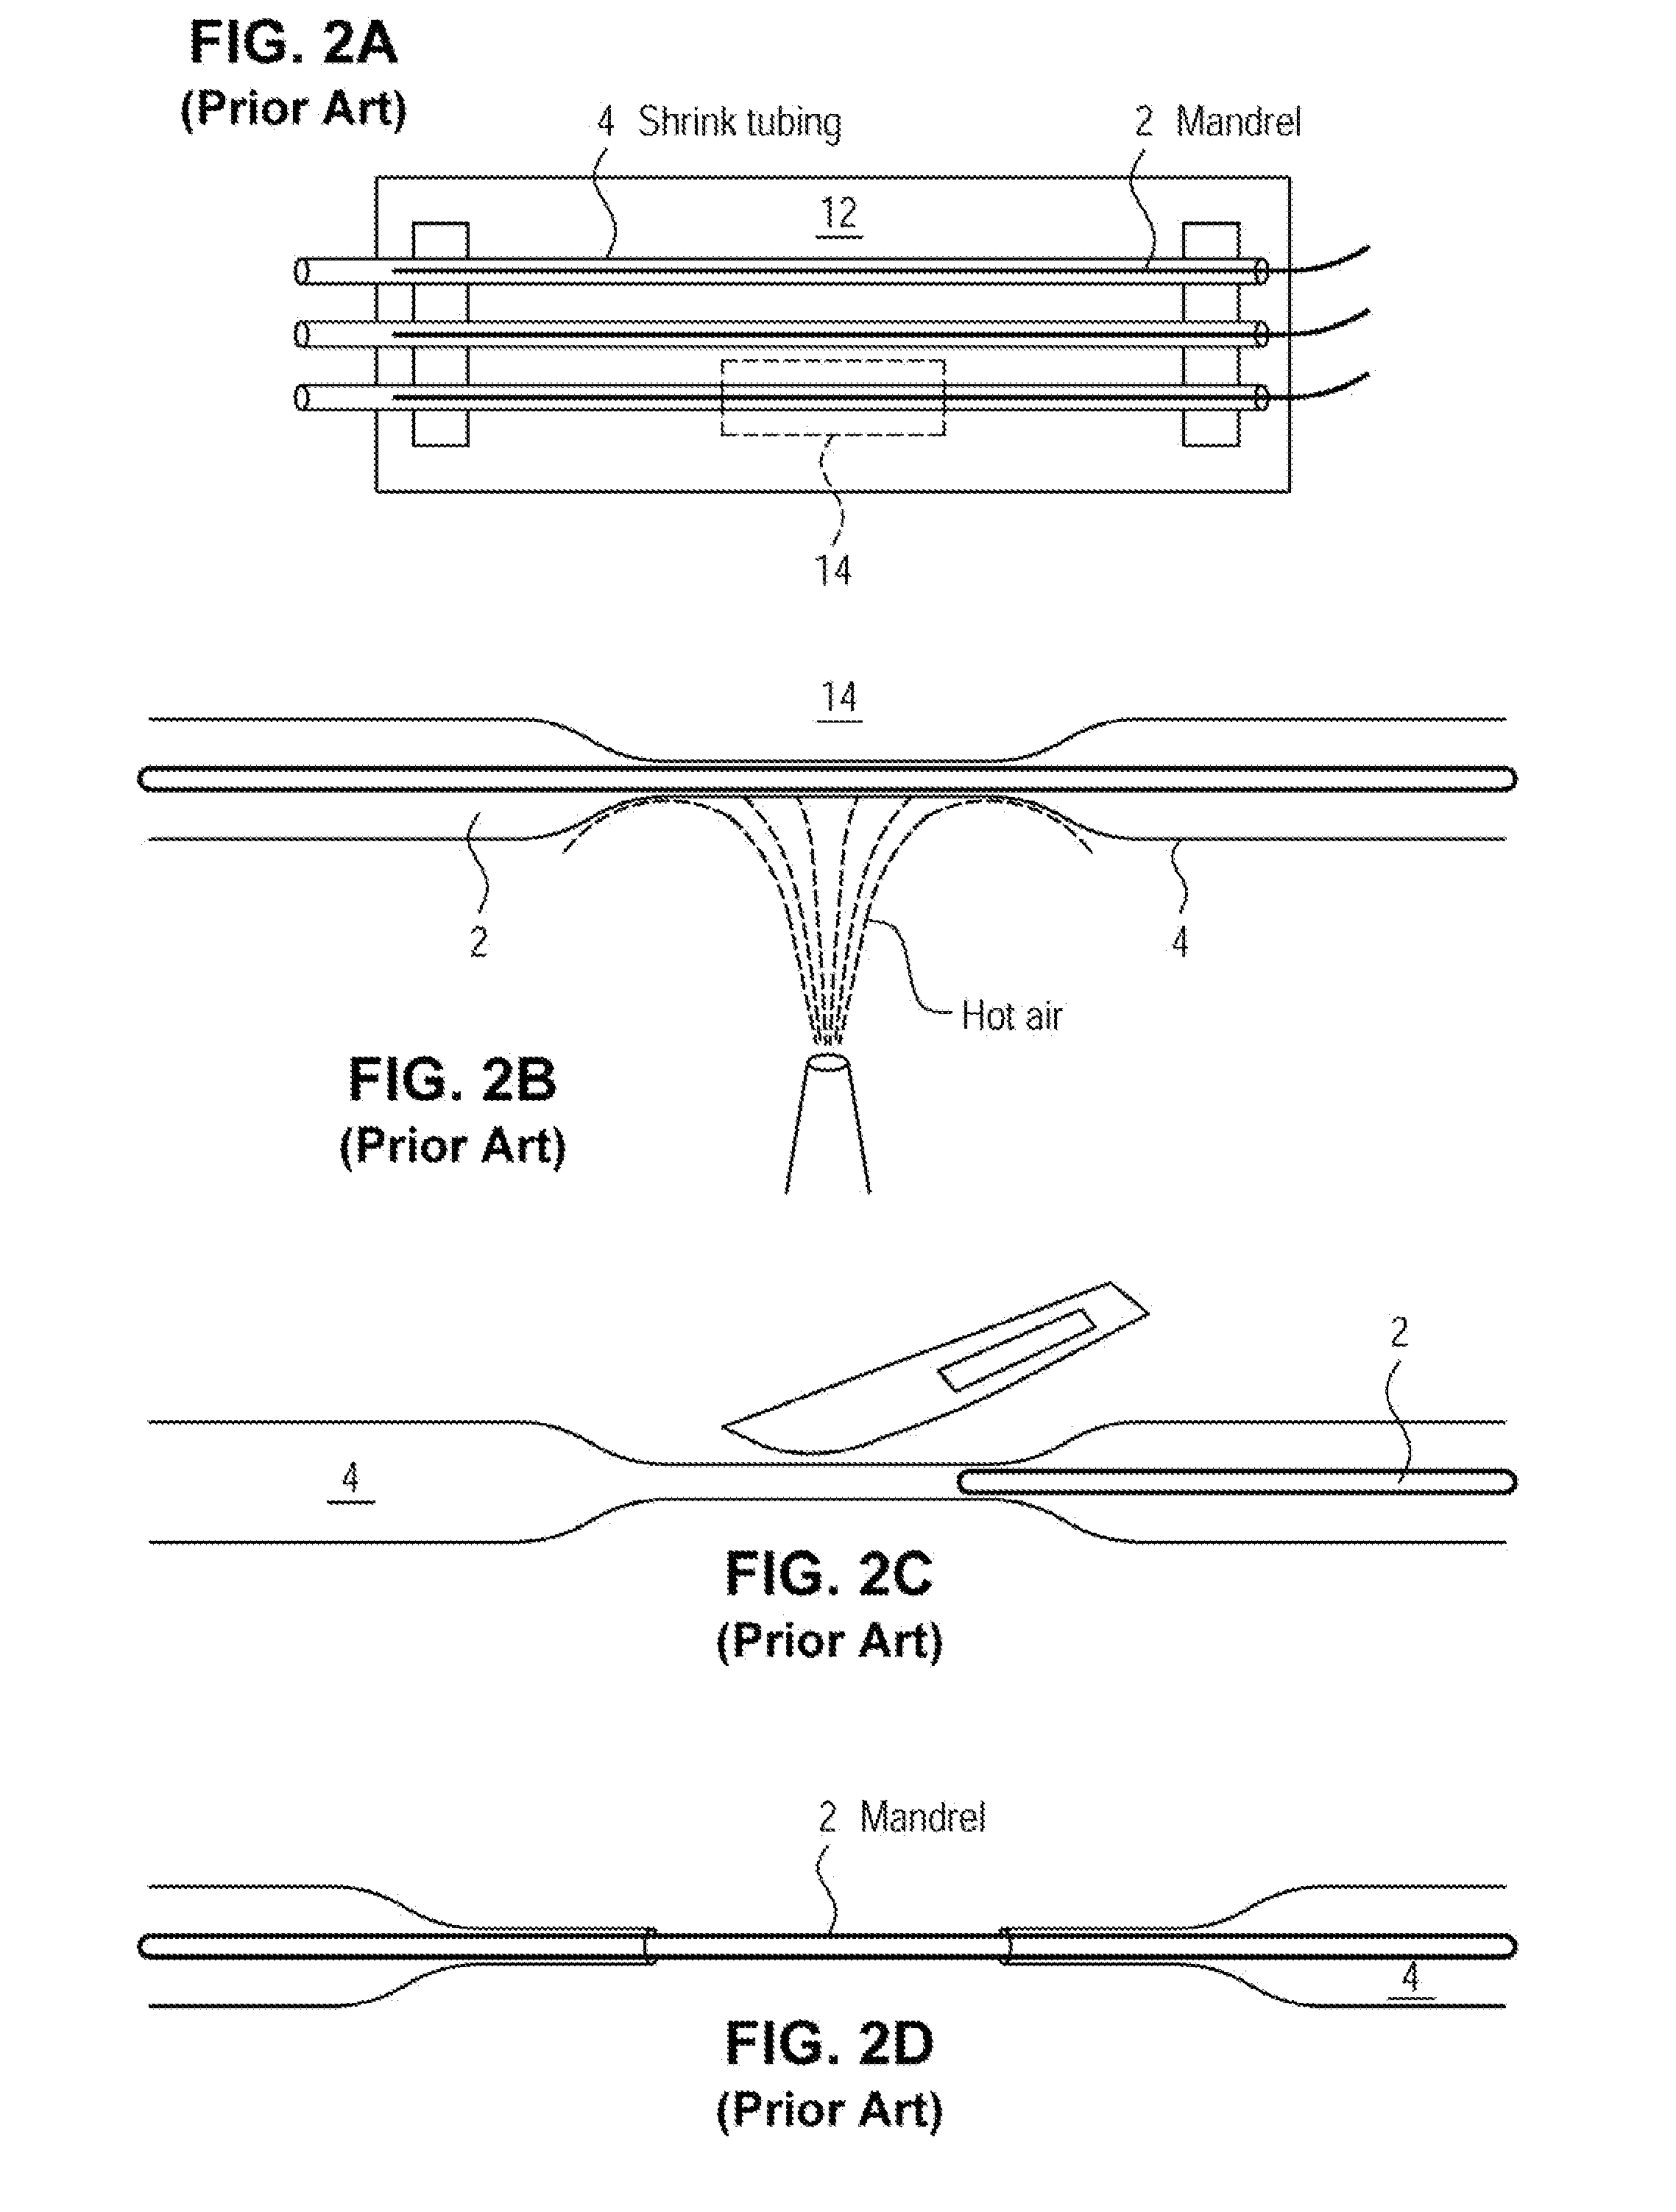 Method for creating perfusable microvessel systems